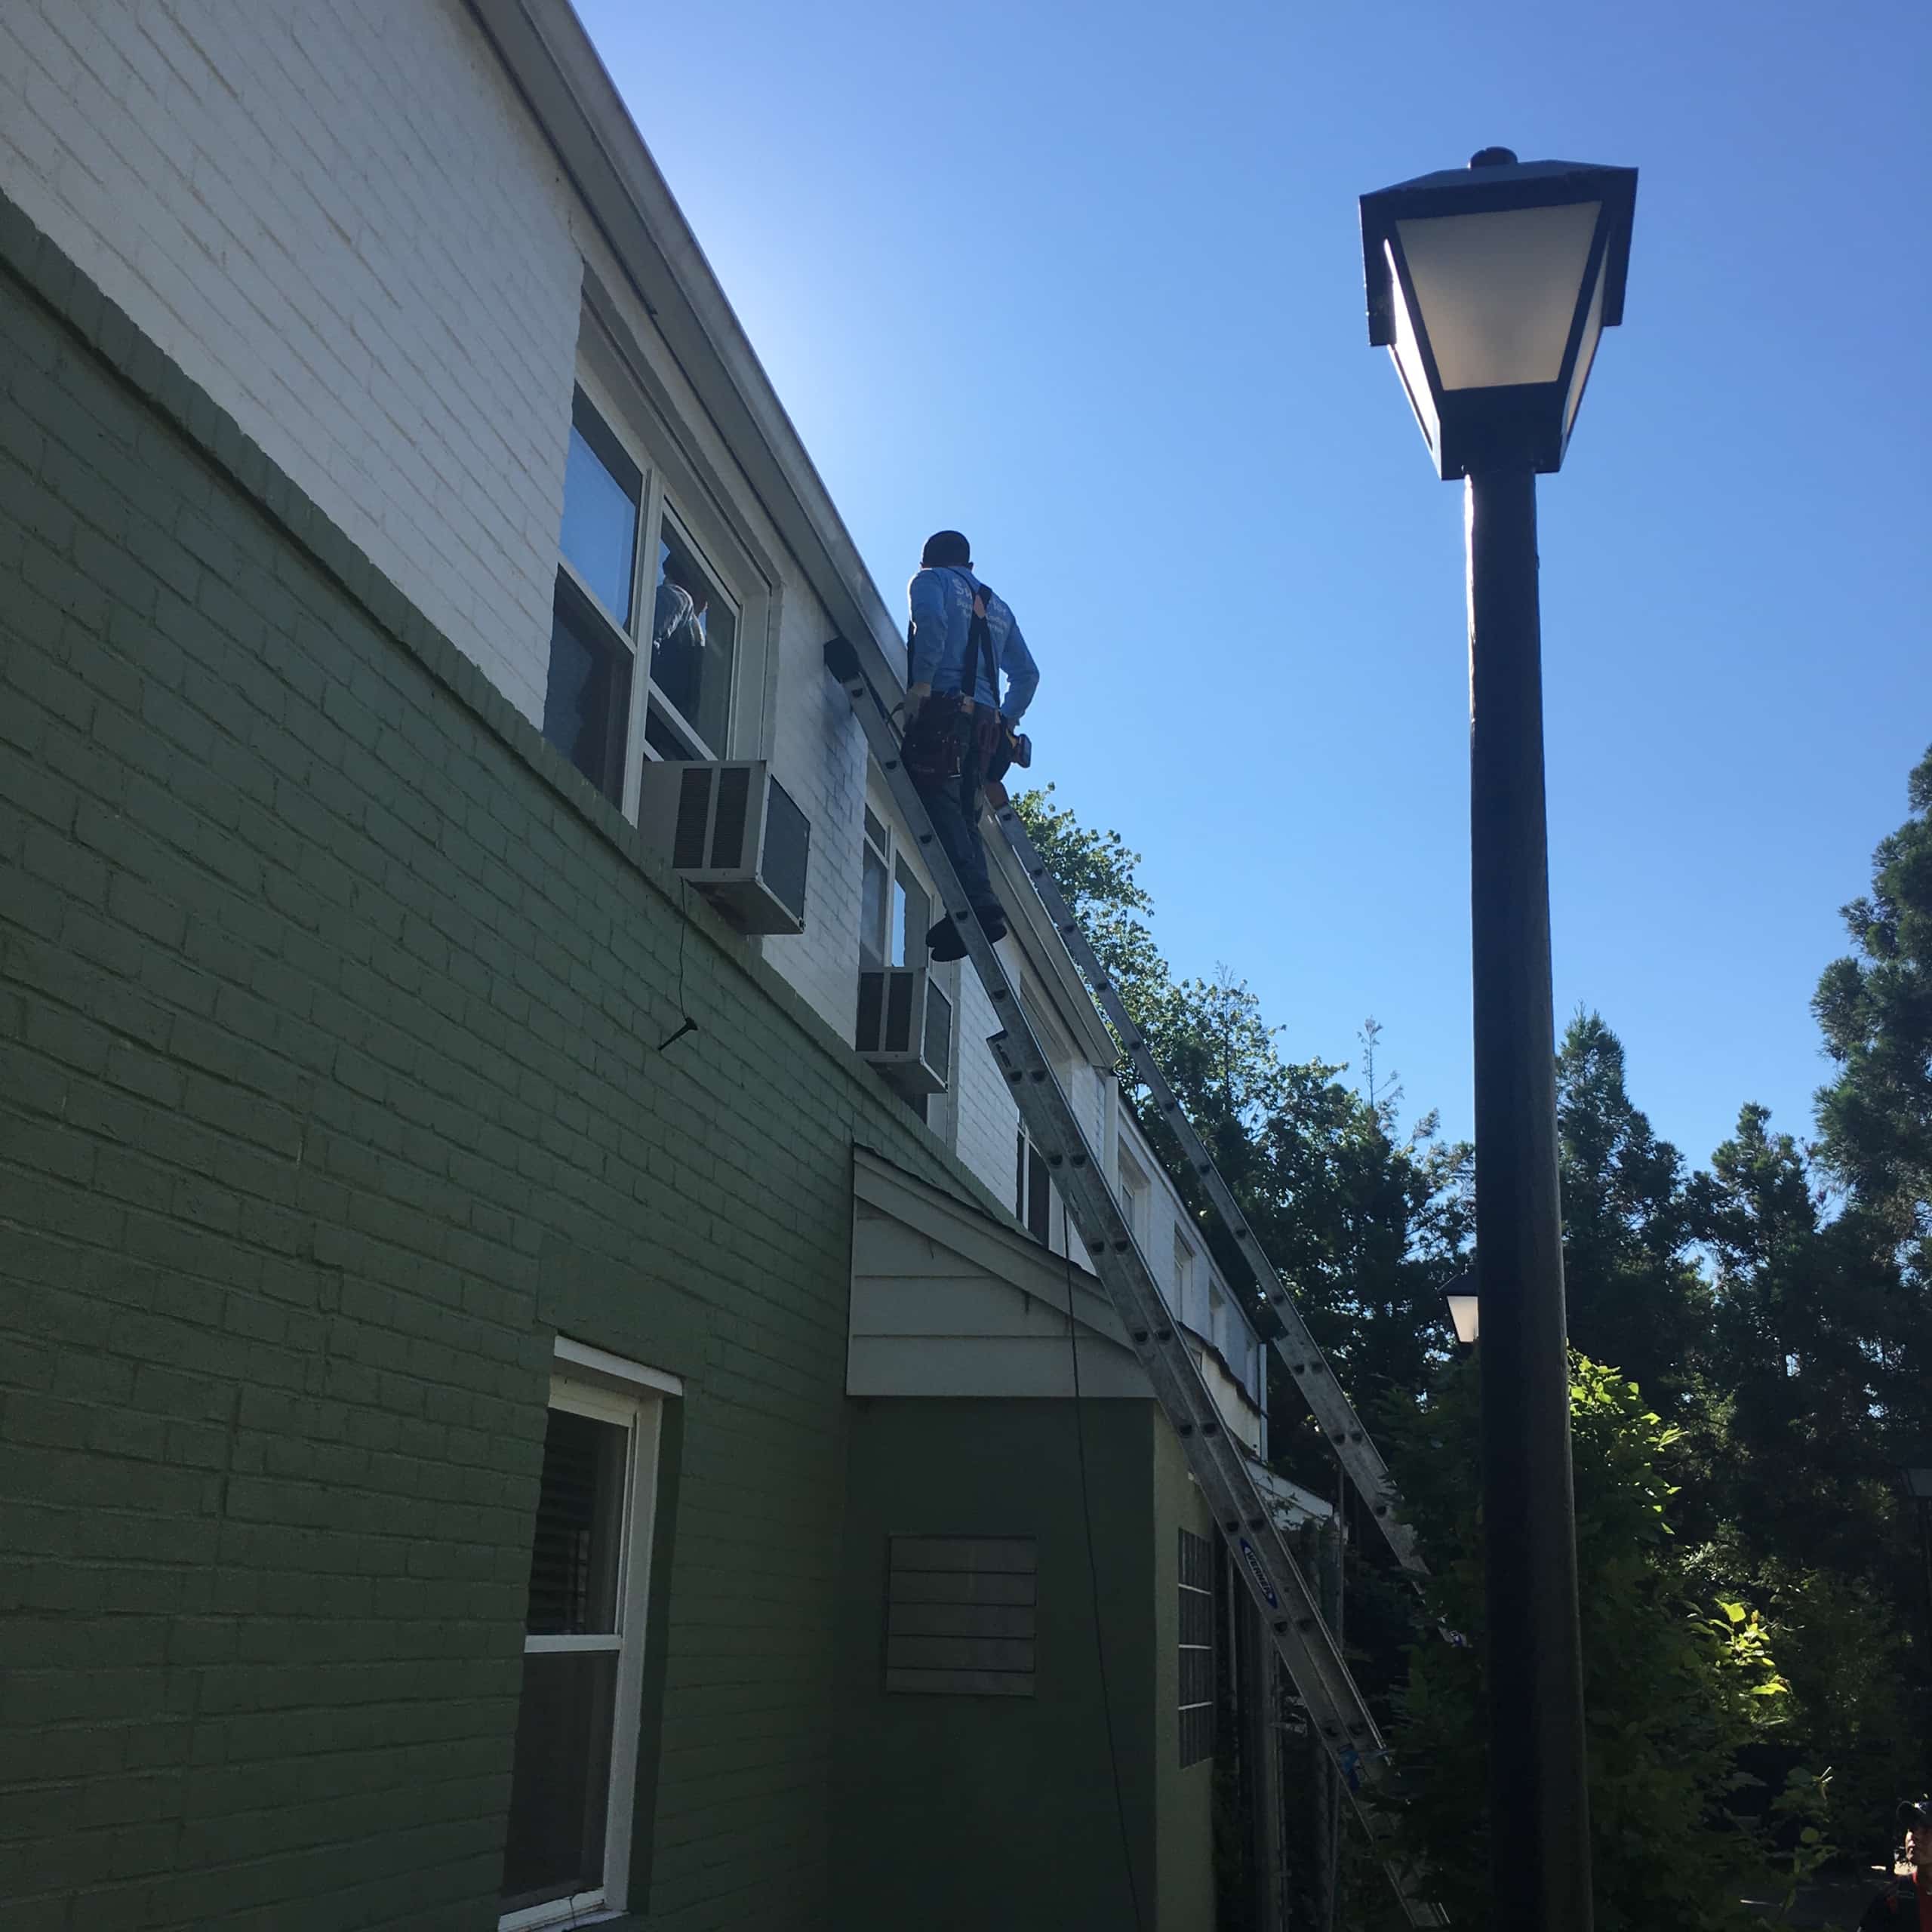 Gutter Installation, Repair and Cleaning in the Teaneck, NJ Area